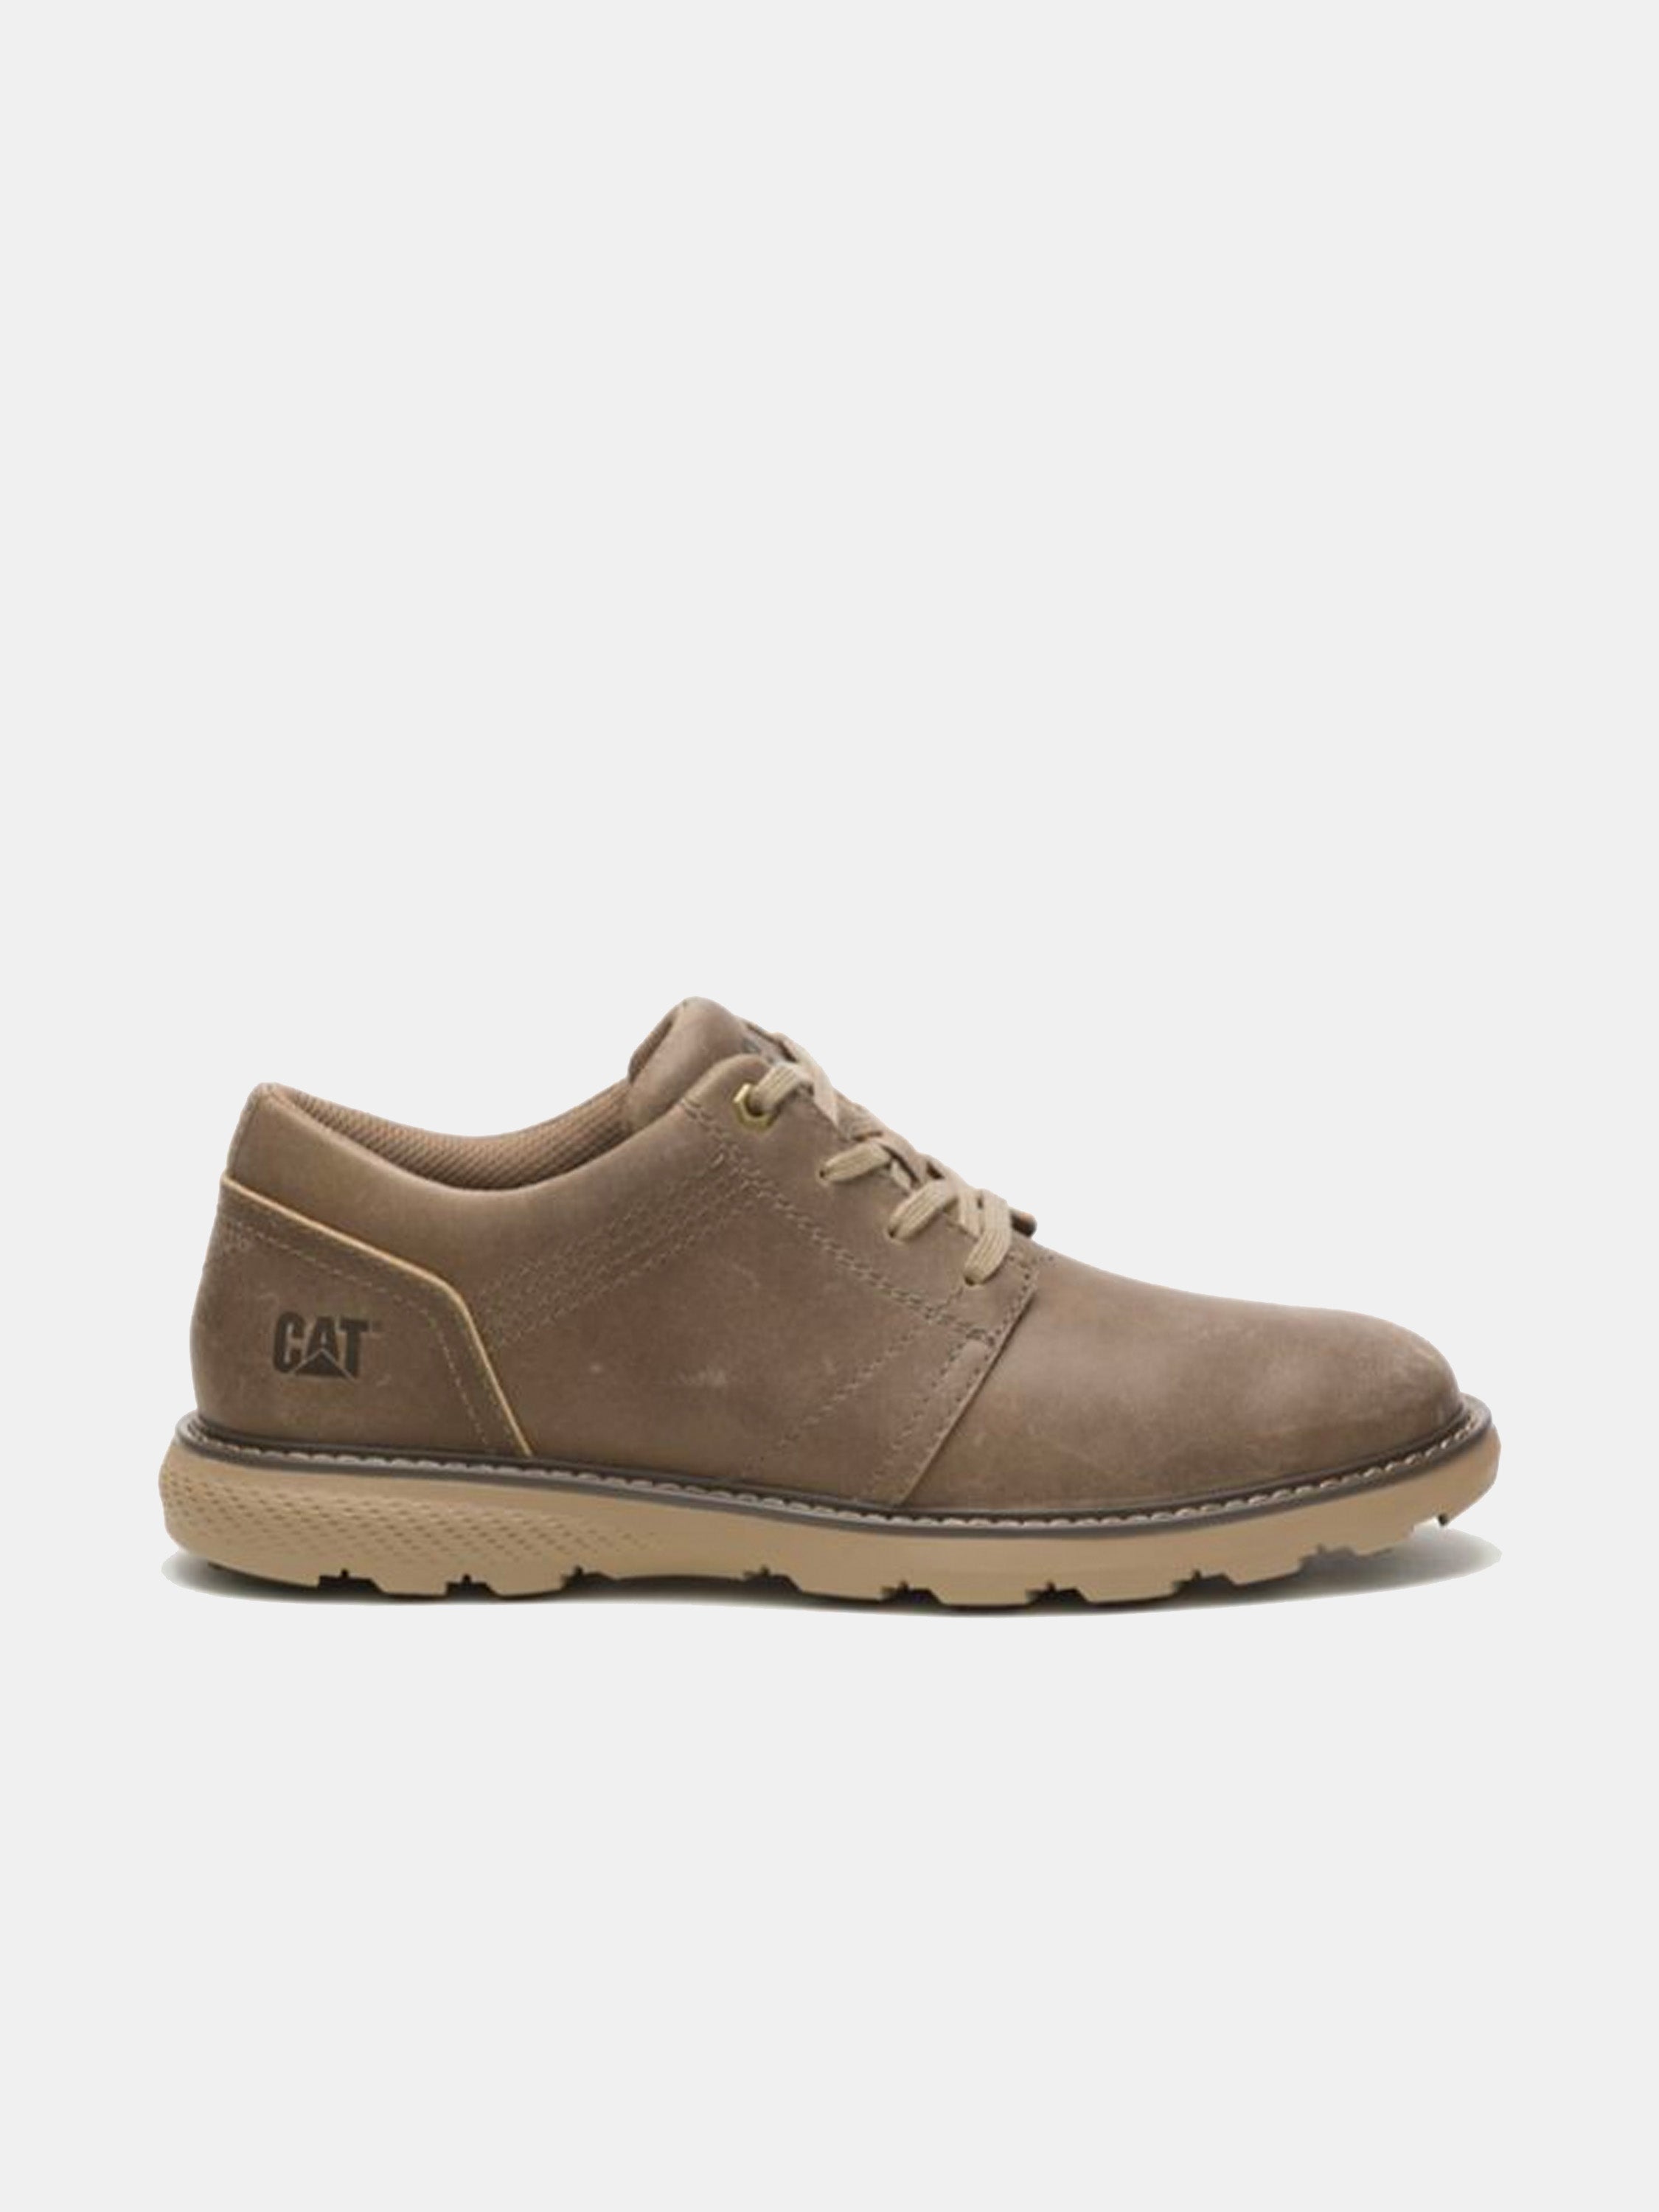 Caterpillar Men's Oly 2.0 Lace Up Shoes #color_Brown